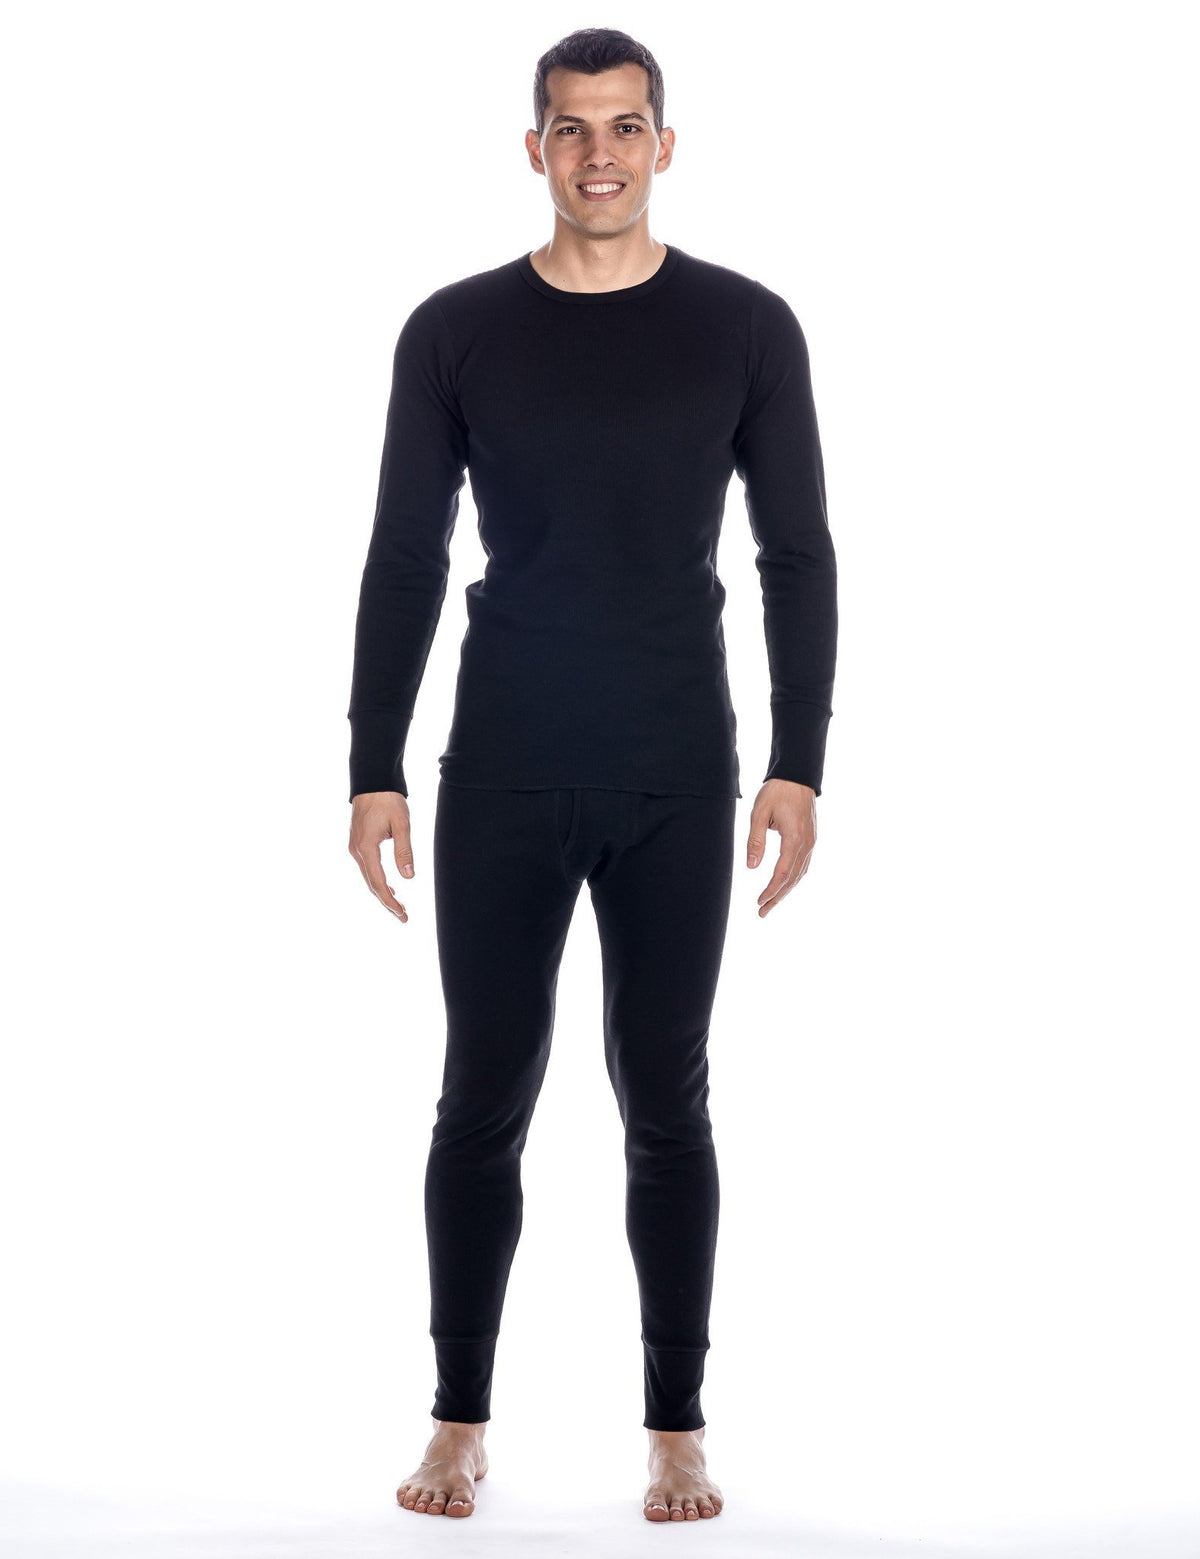 Men's Extreme Cold Waffle Knit Thermal Top and Bottom Set - Black